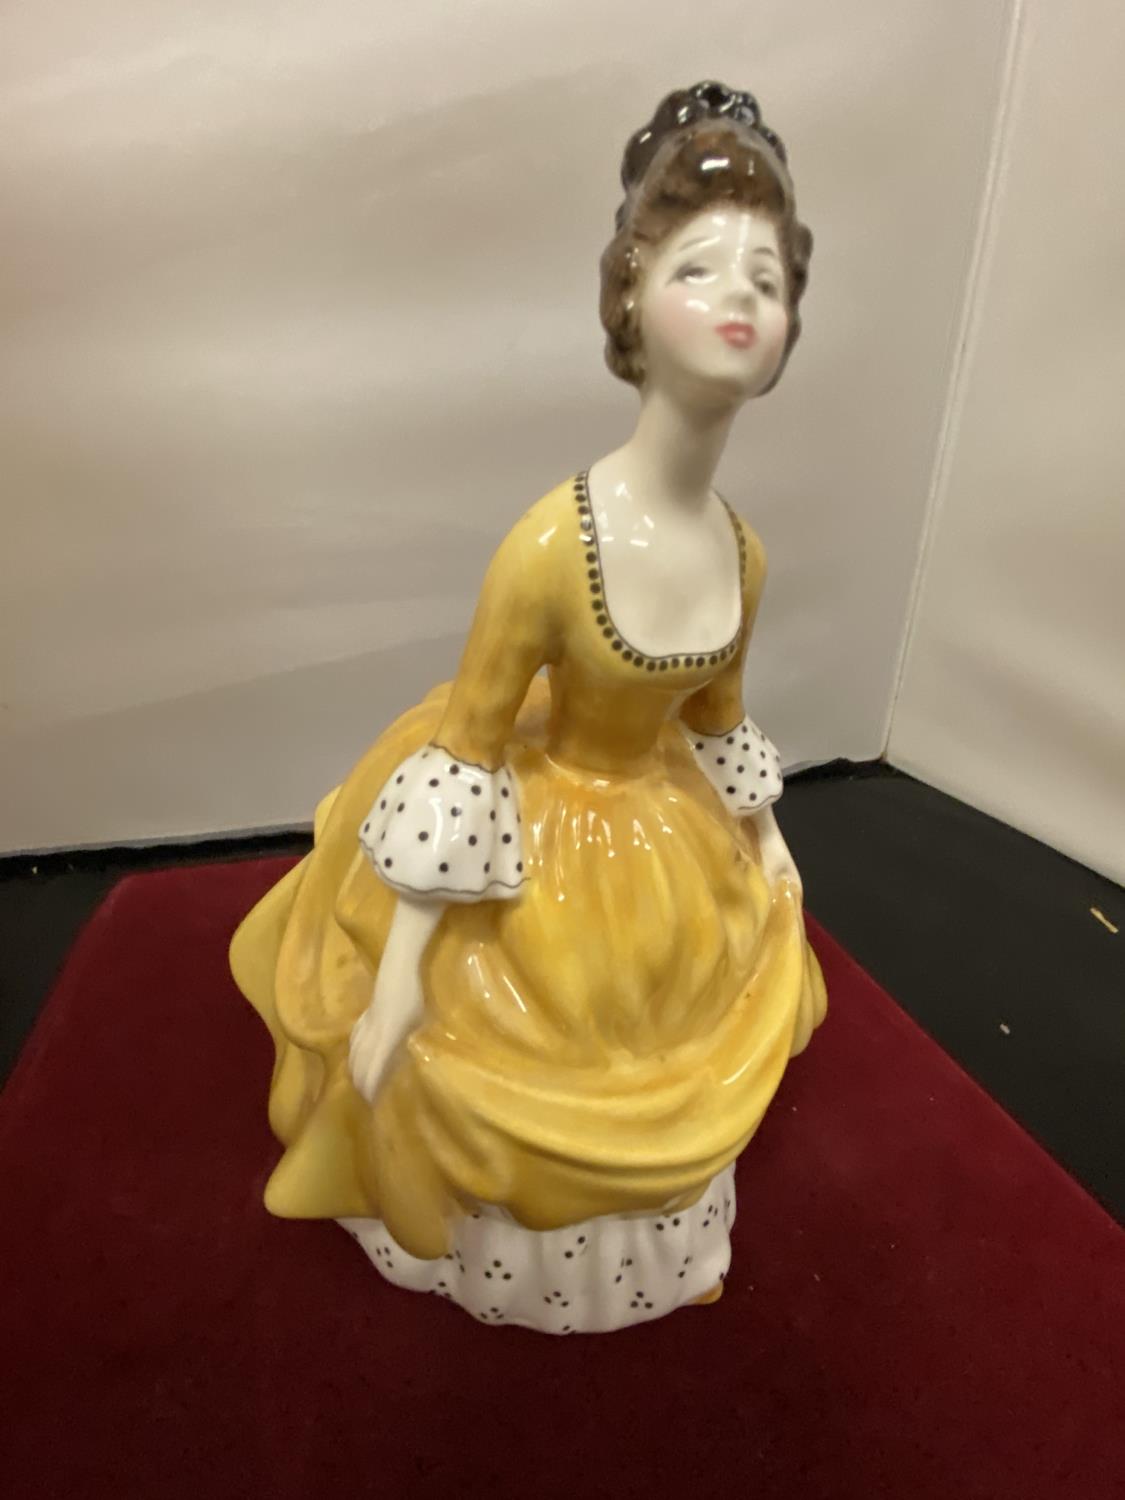 FOUR ROYAL DOULTON FIGURINES (SECONDS) TO INCLUDE SARA, FLEUR, CORALIE AND FIGURE OF THE YEAR AMY - Image 6 of 9